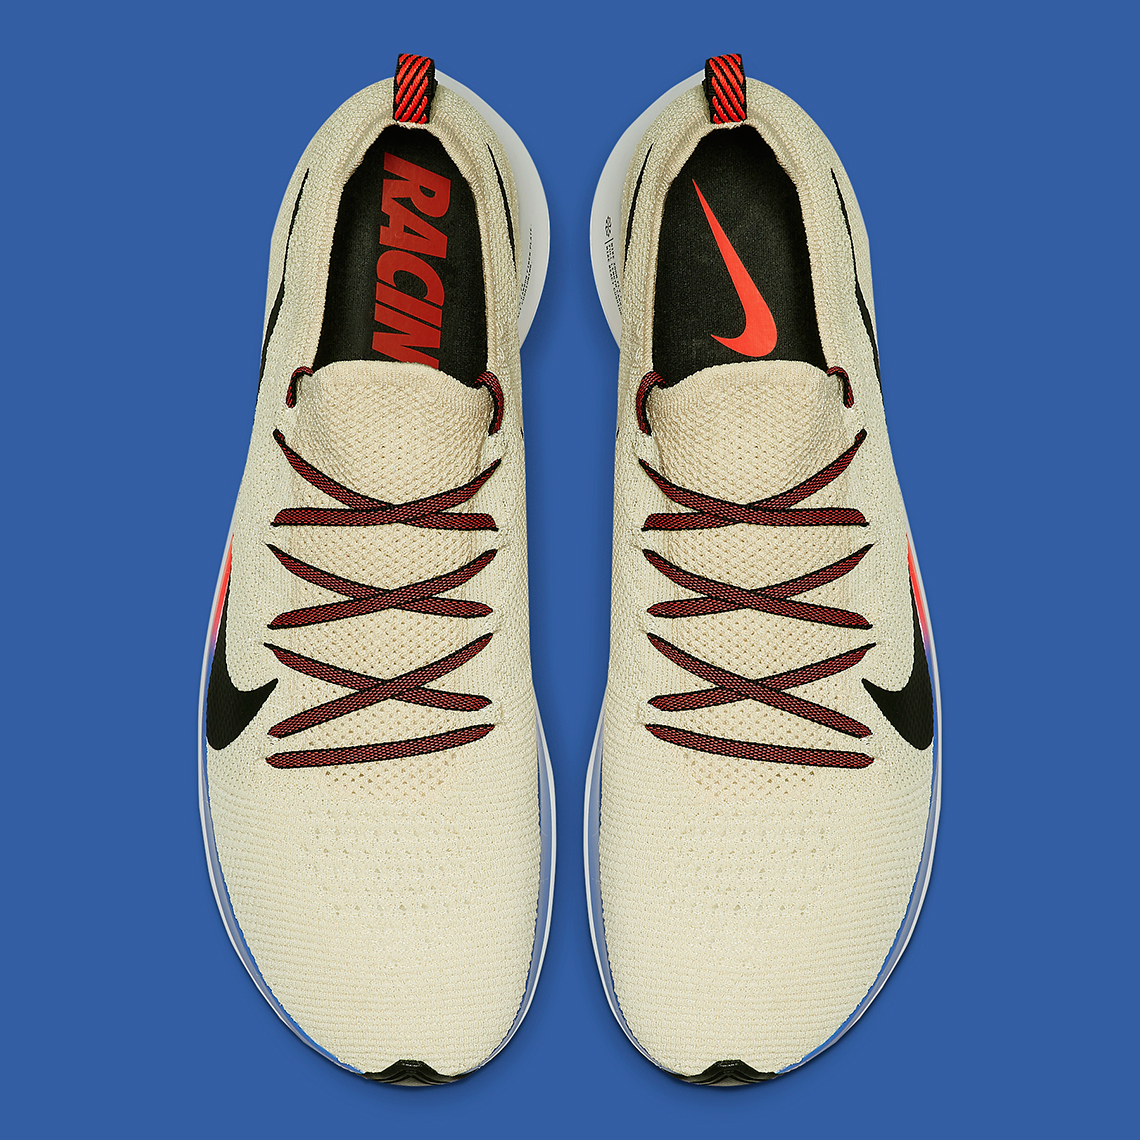 Nike Zoom Fly Flyknit Cream Red Blue AR4561-200 | SneakerNews.com